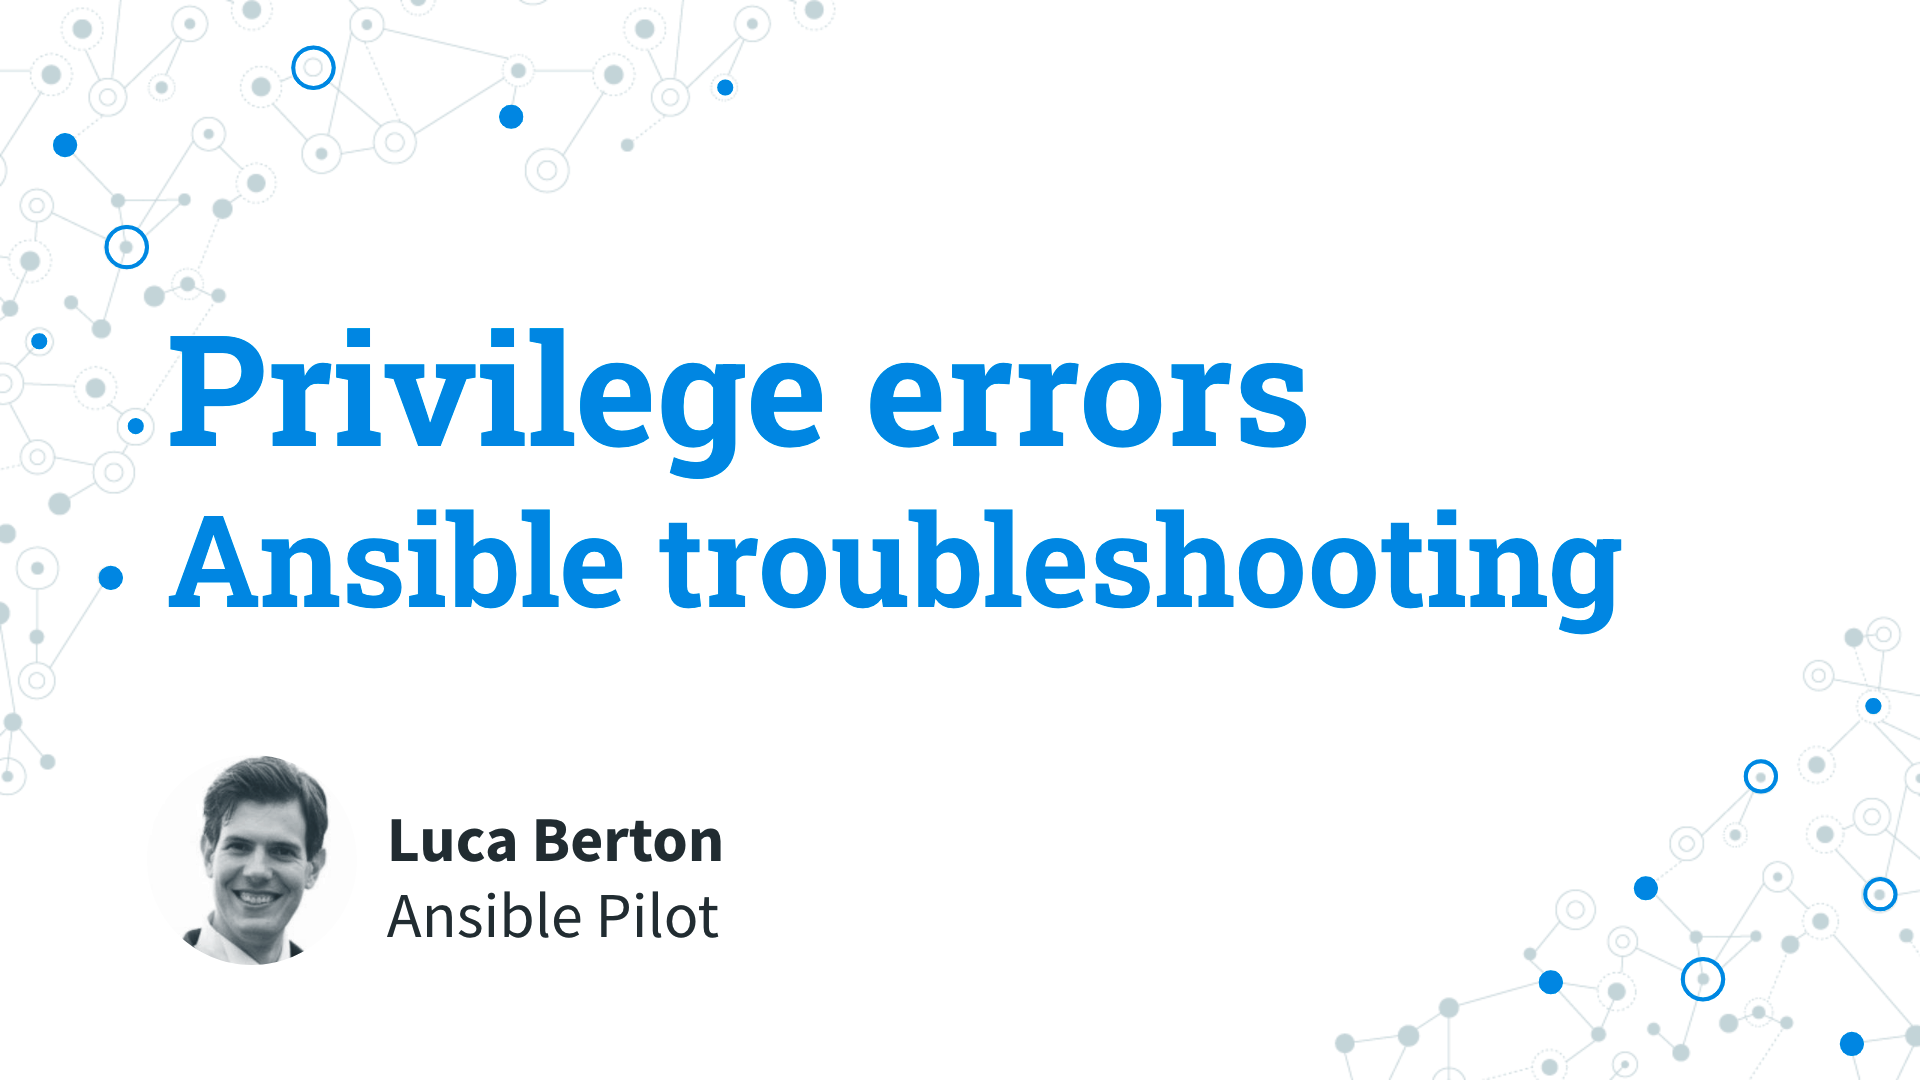 Privilege escalation errors - Ansible troubleshooting